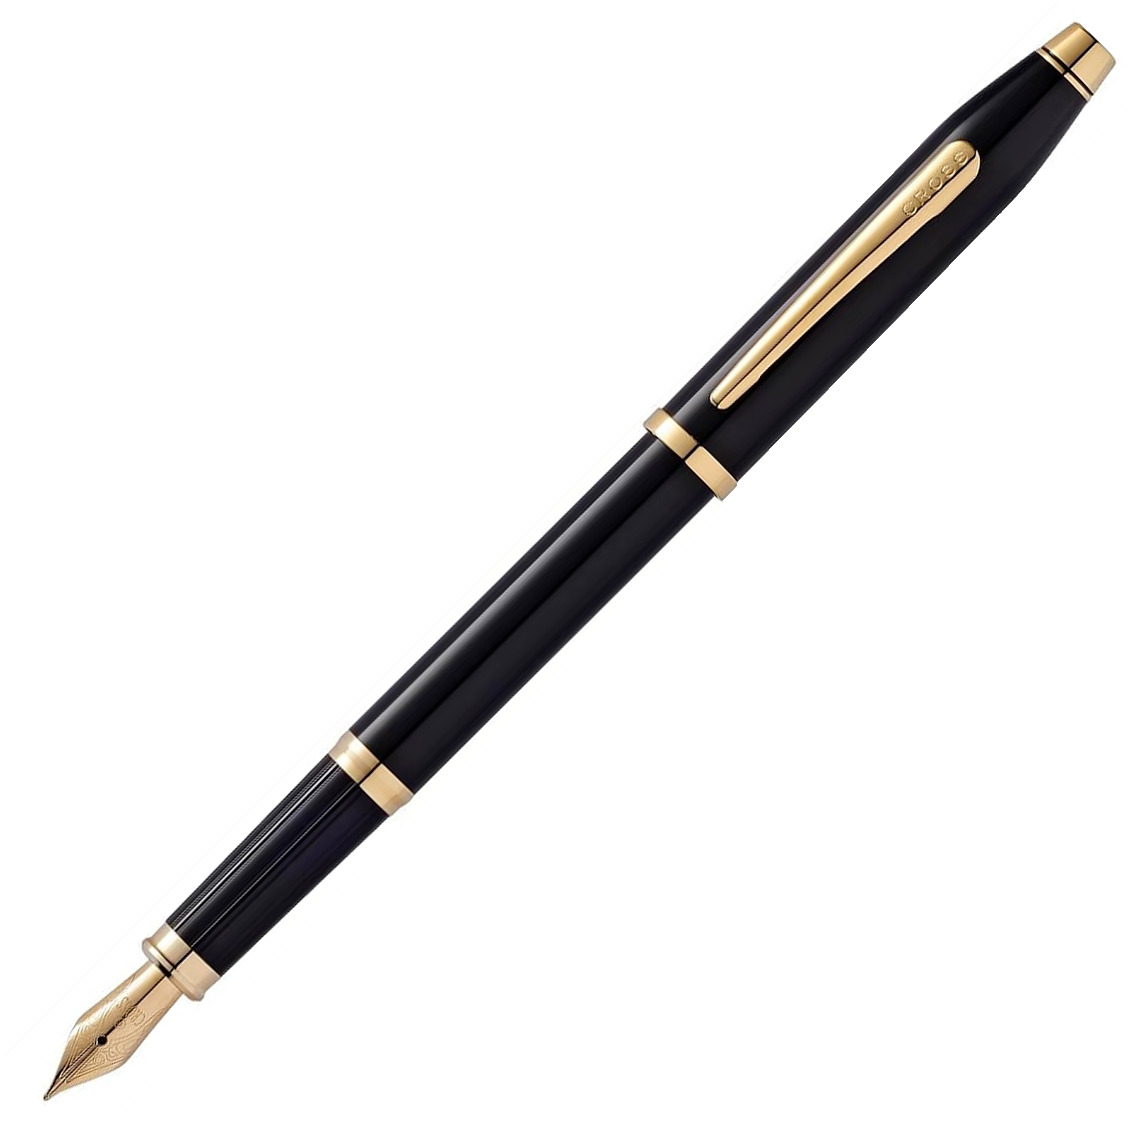 Crross Century II Black Fountain Pen 23KT Gold Plated Appointments Fine Nib0.7mm